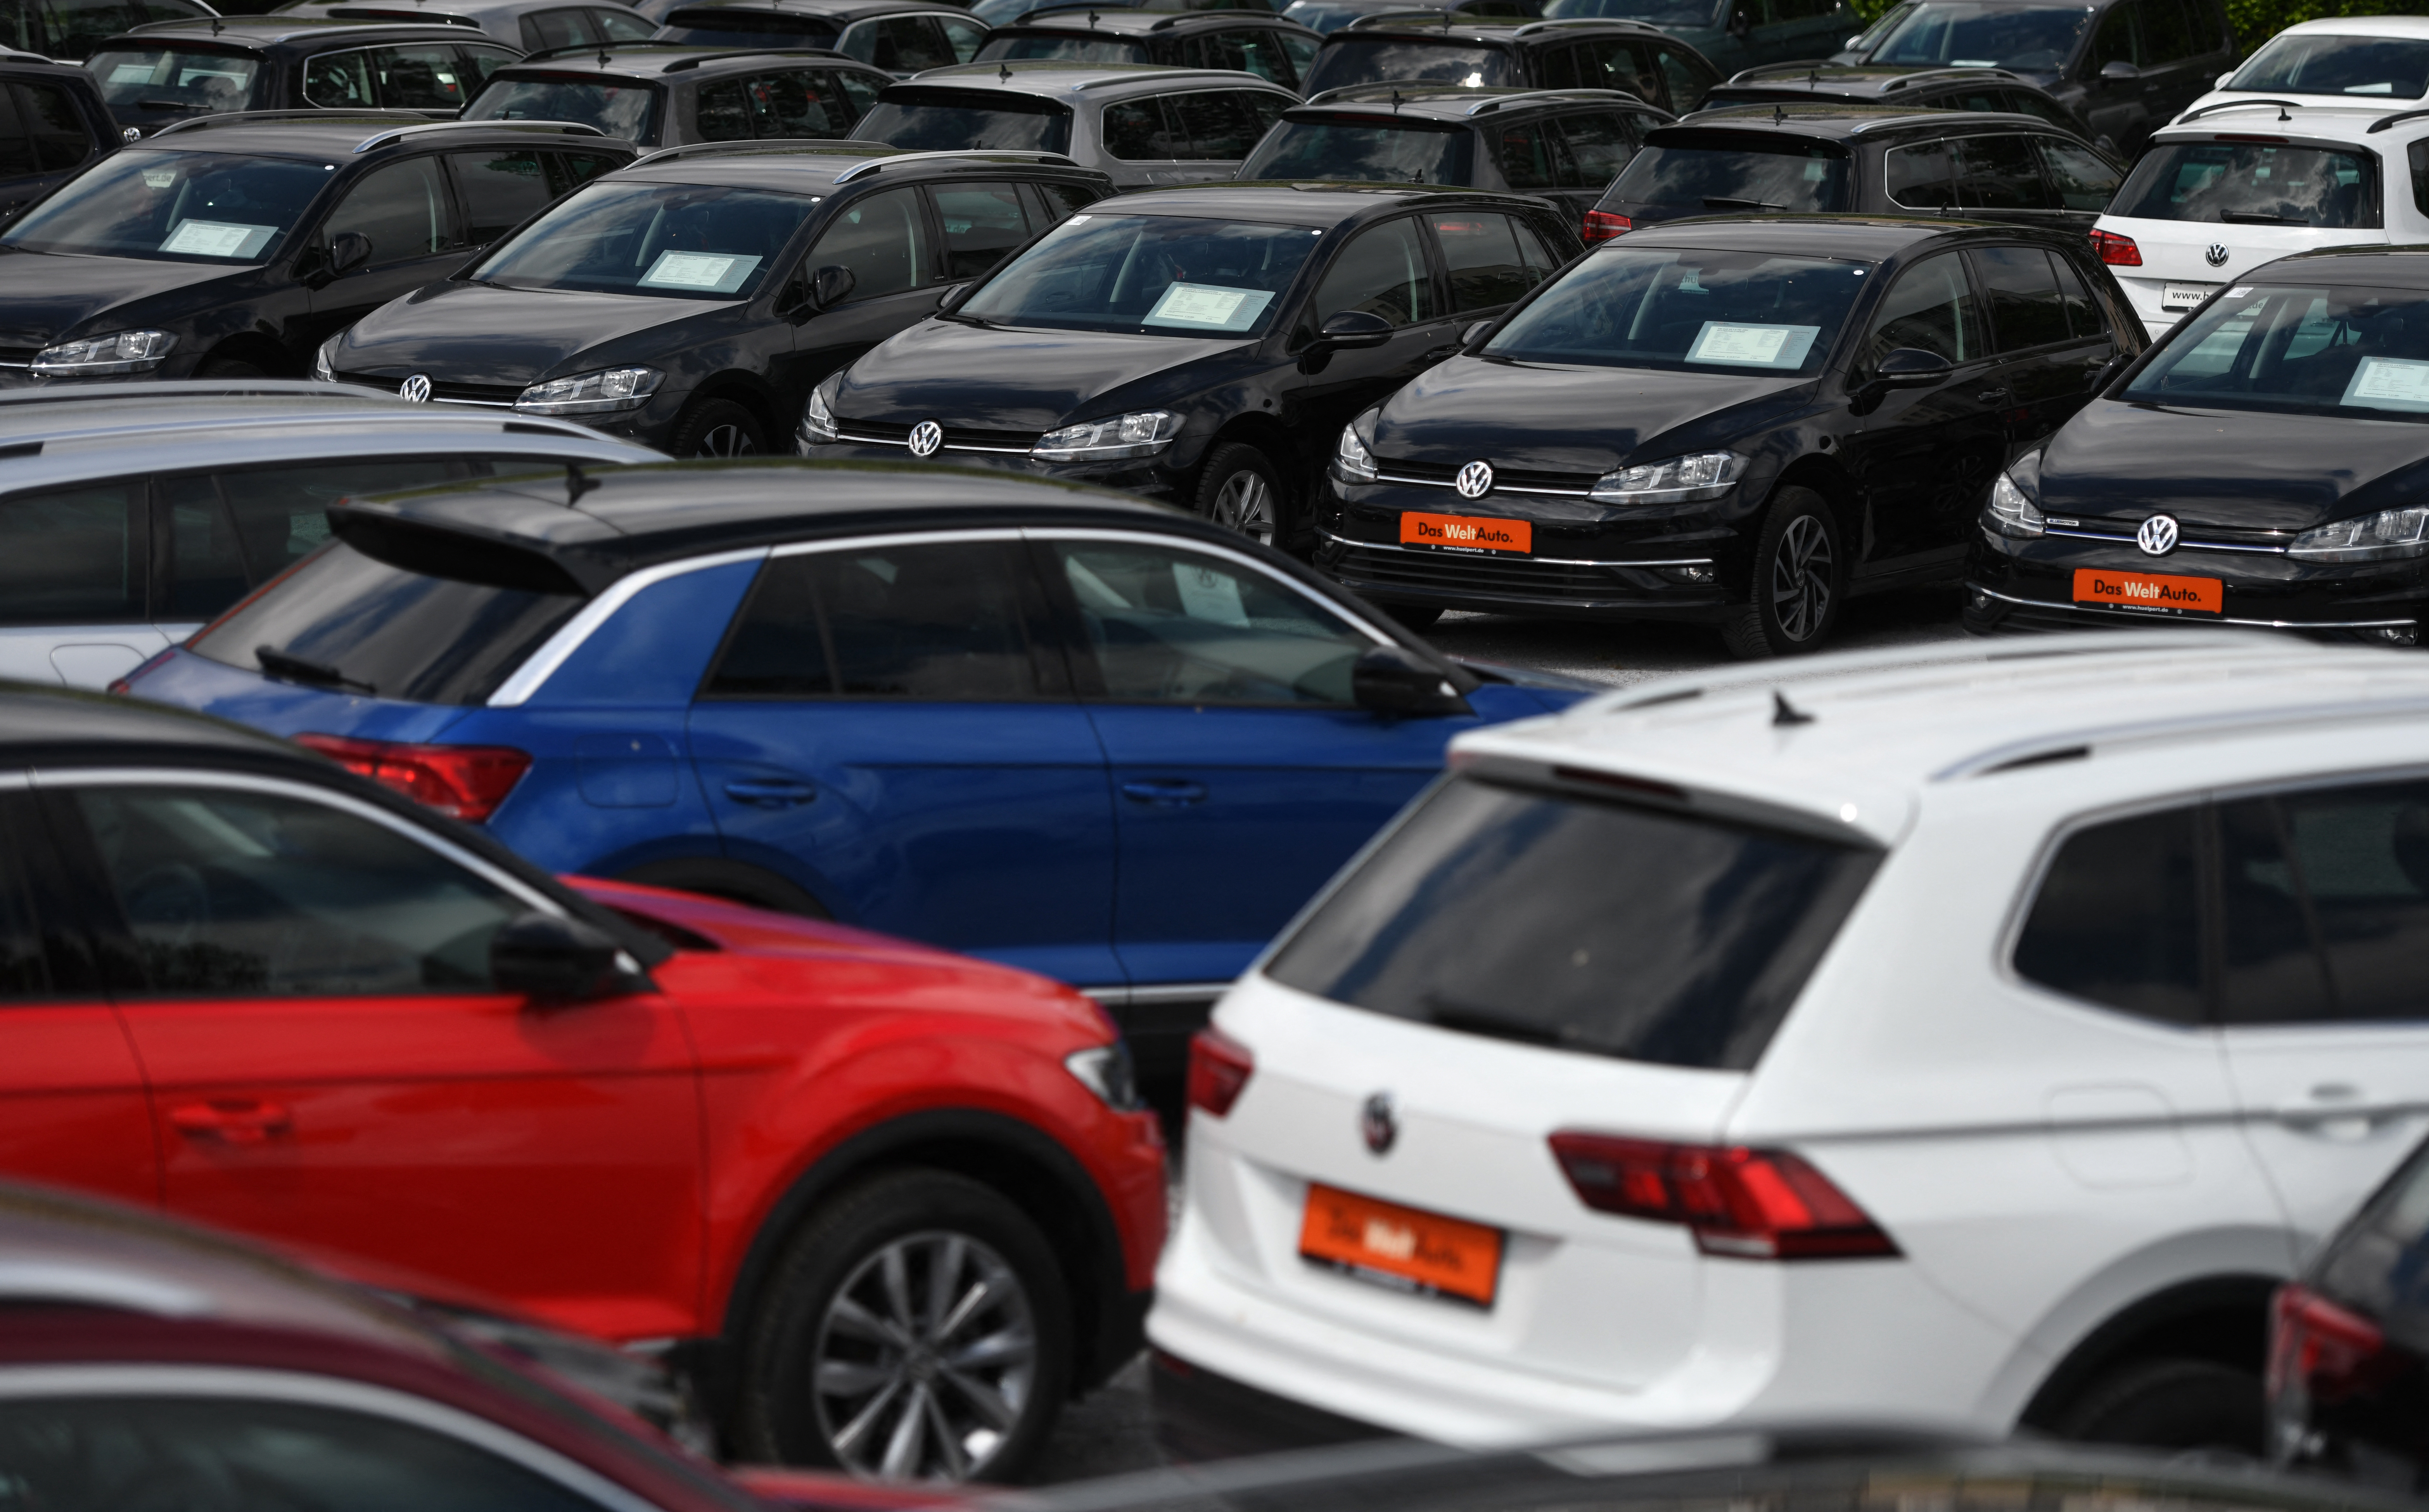 Used-car market booms due to chip shortage